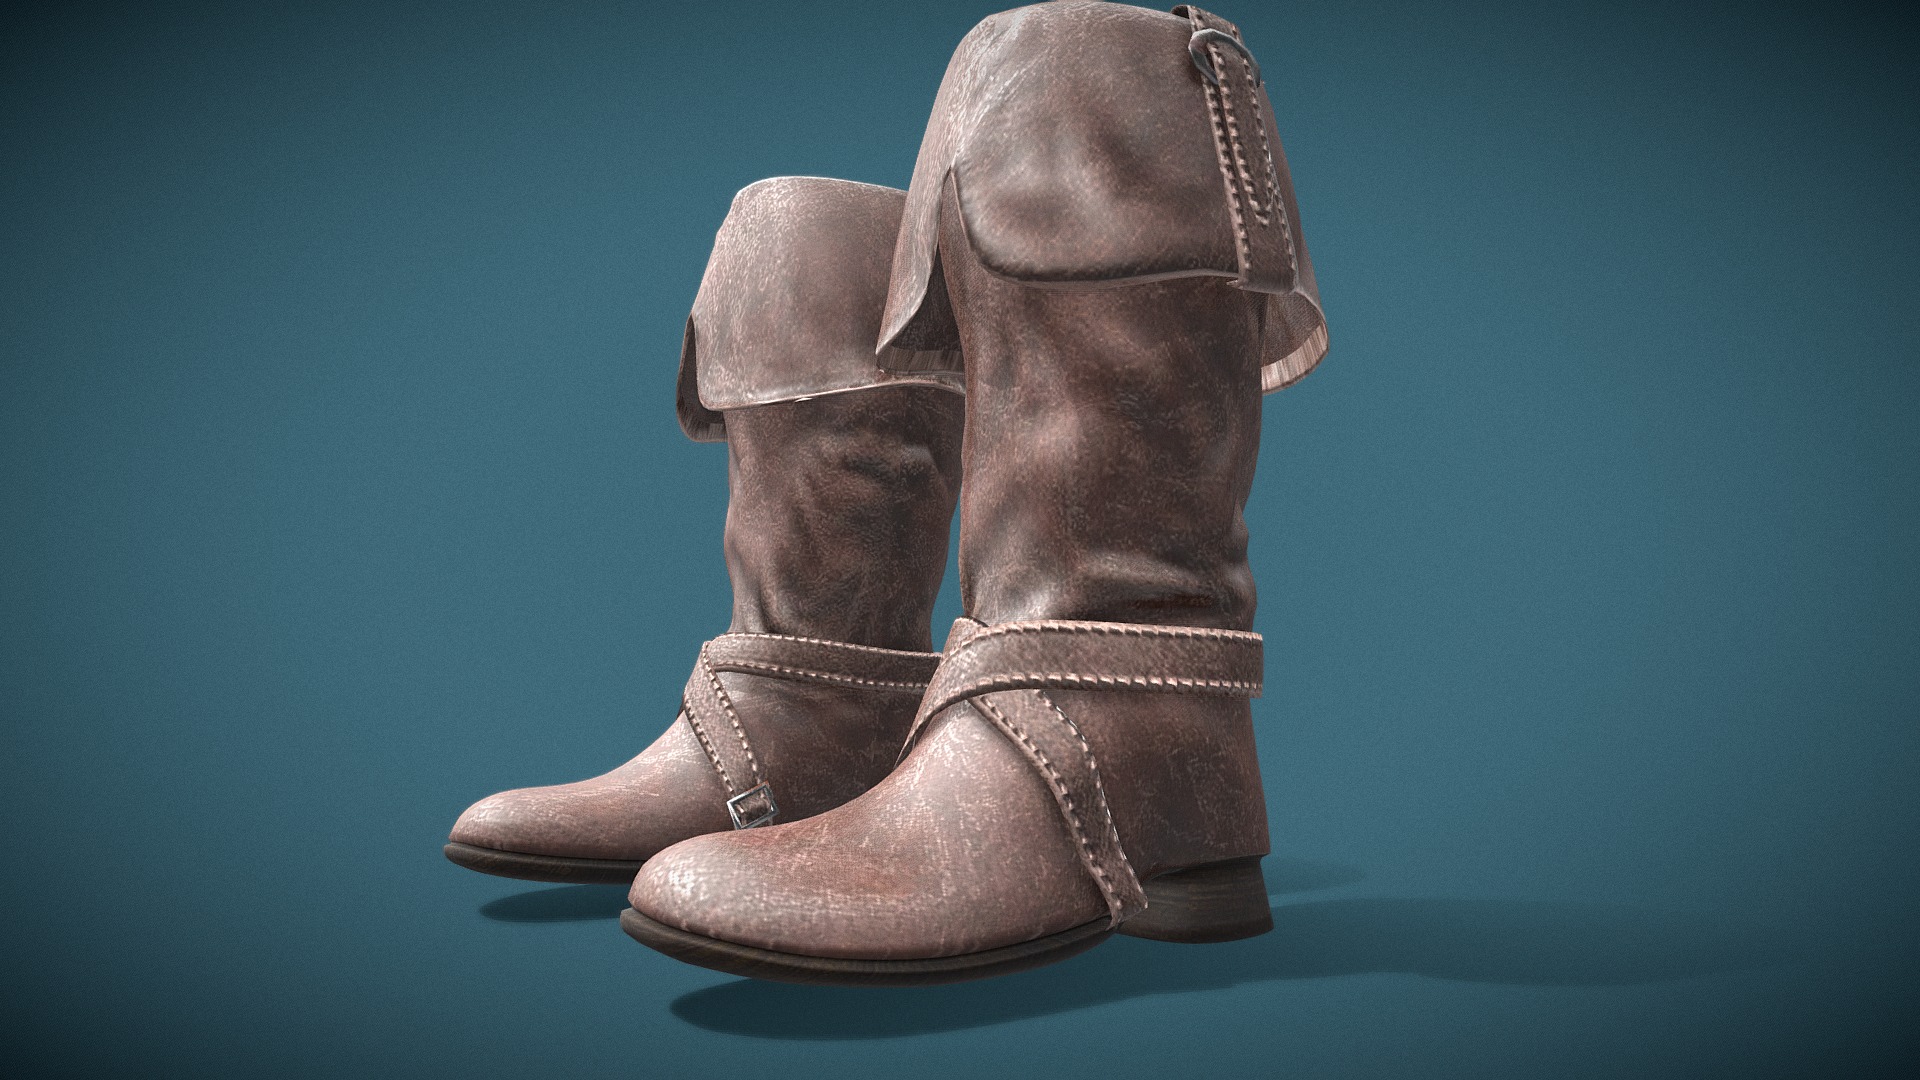 3D model Pirate / Cavalier Boots - This is a 3D model of the Pirate / Cavalier Boots. The 3D model is about a pair of brown boots.